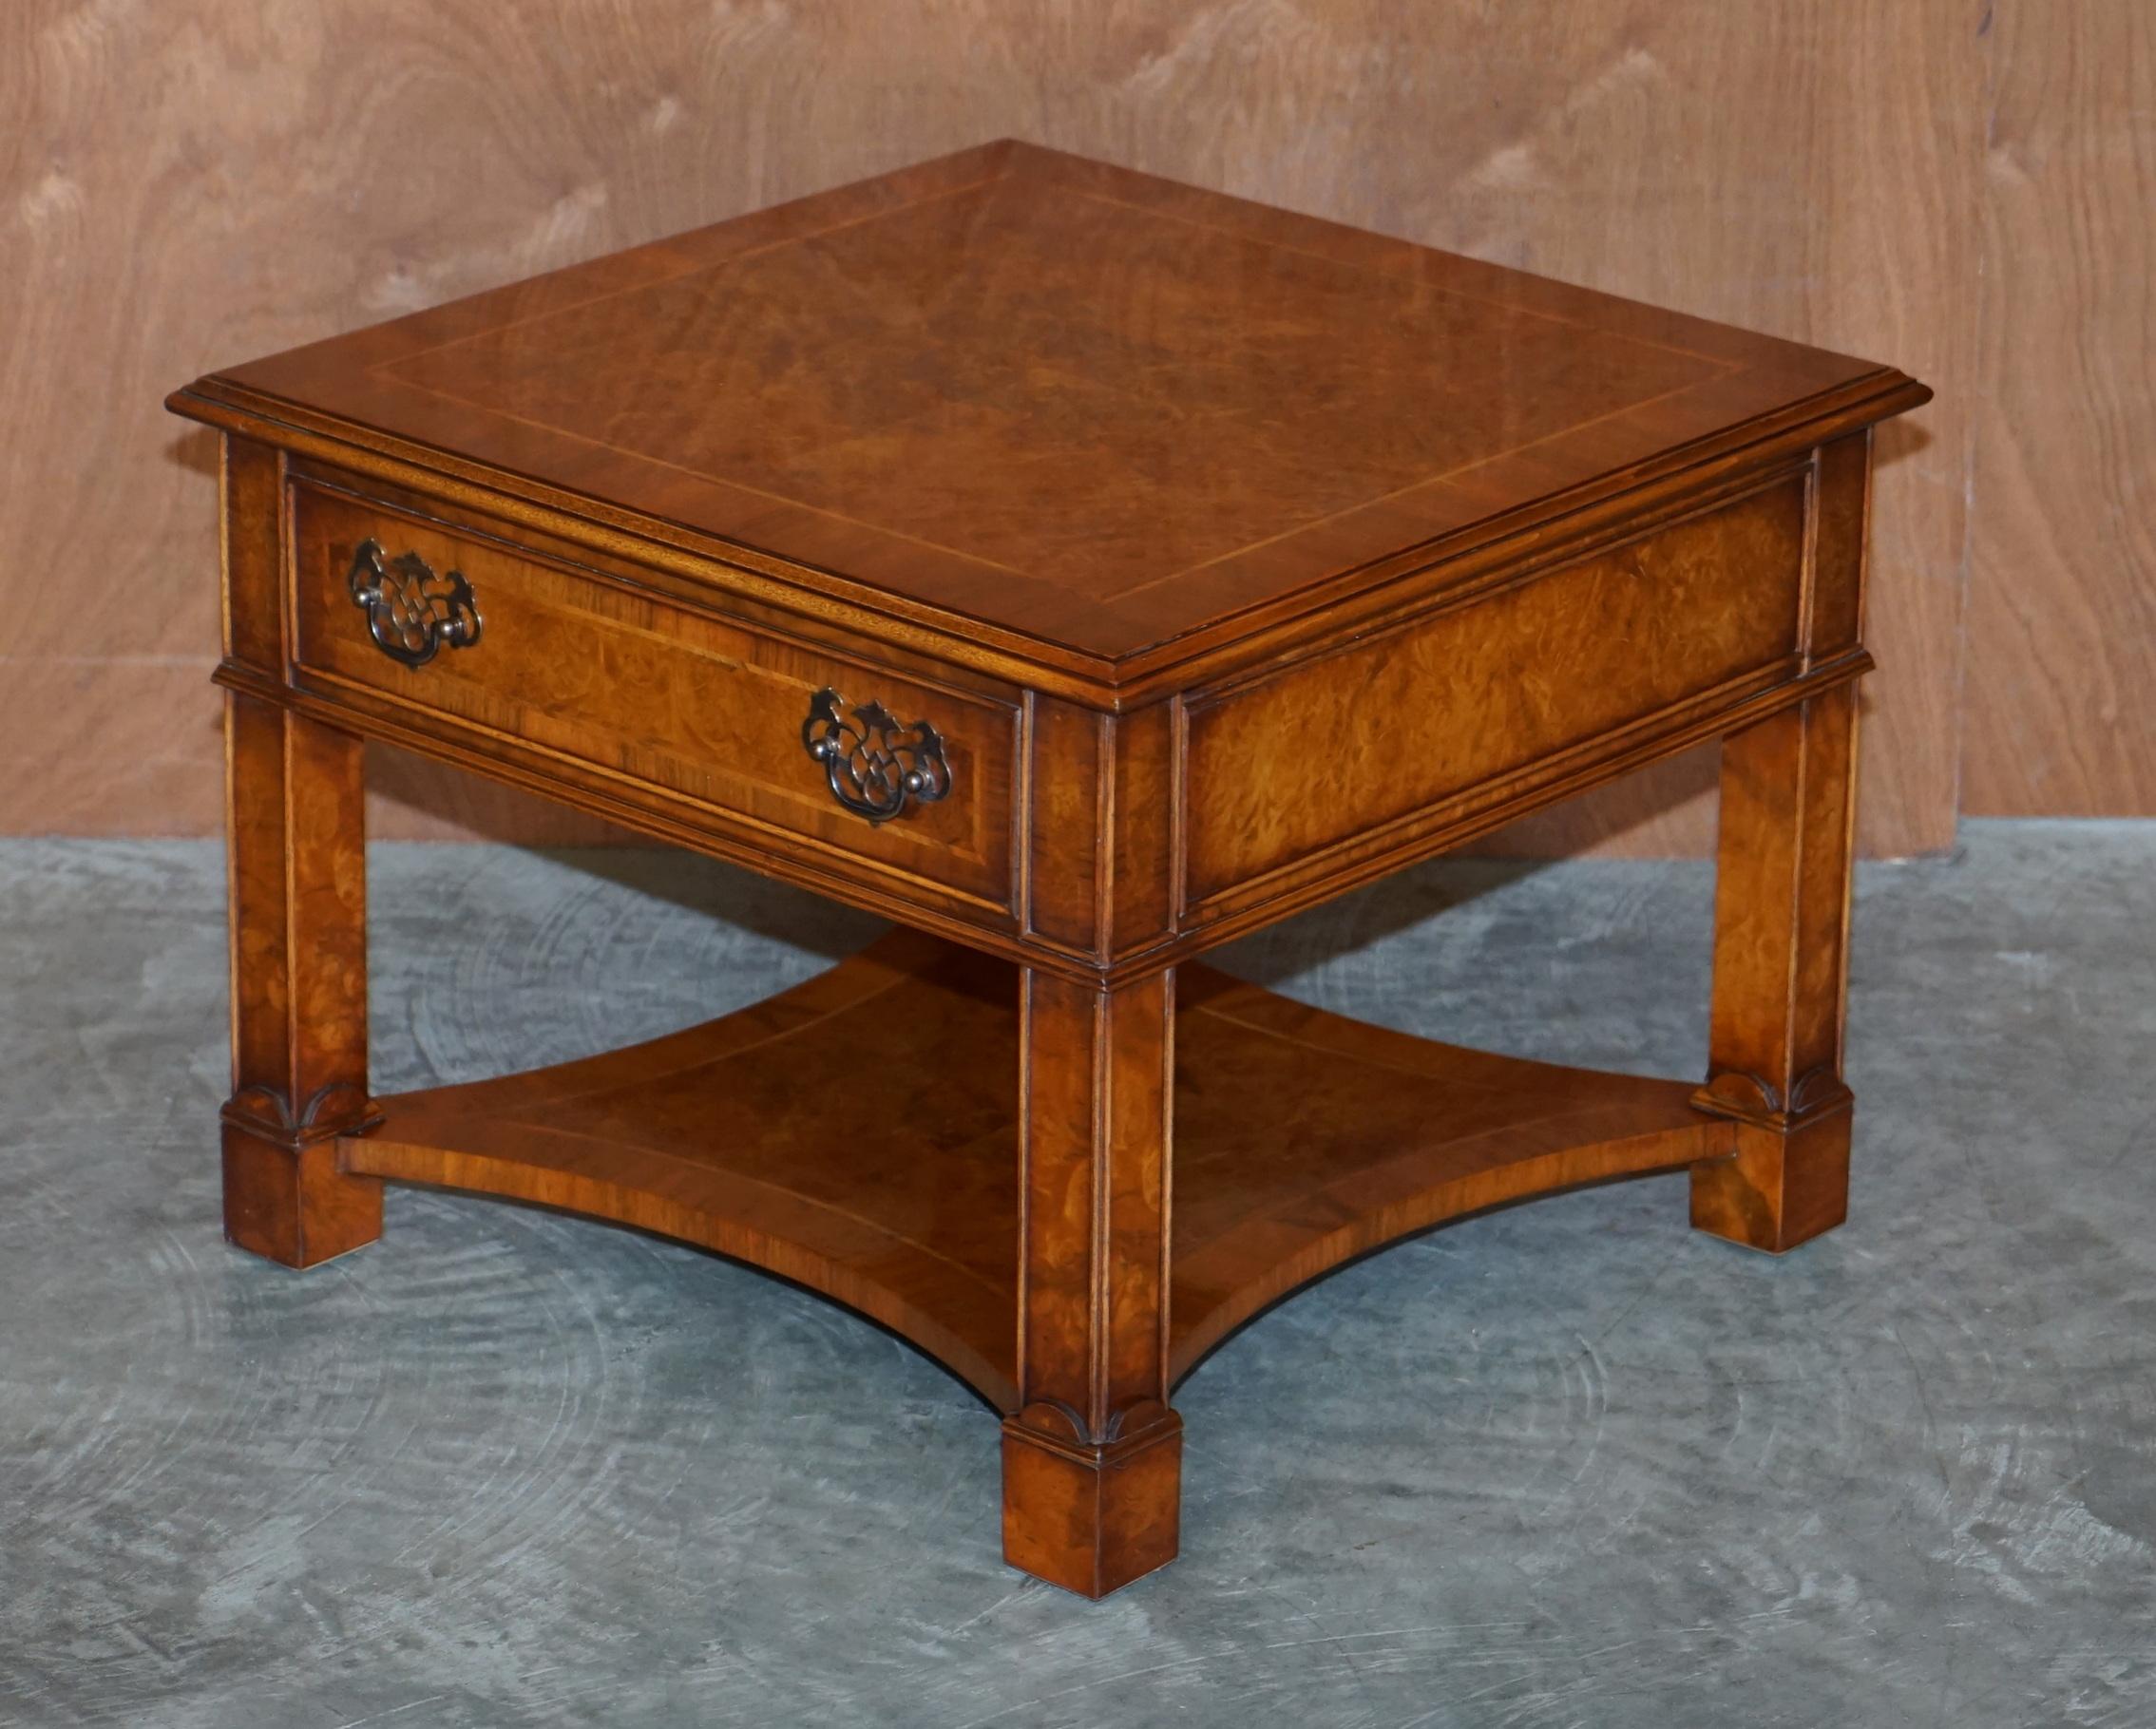 We are delighted to offer for sale this stunning pair of Brights of Nettlebed burr walnut large side tables with single drawers

I have the matching large coffee table listed under my other items as well

A good looking well made and decorative